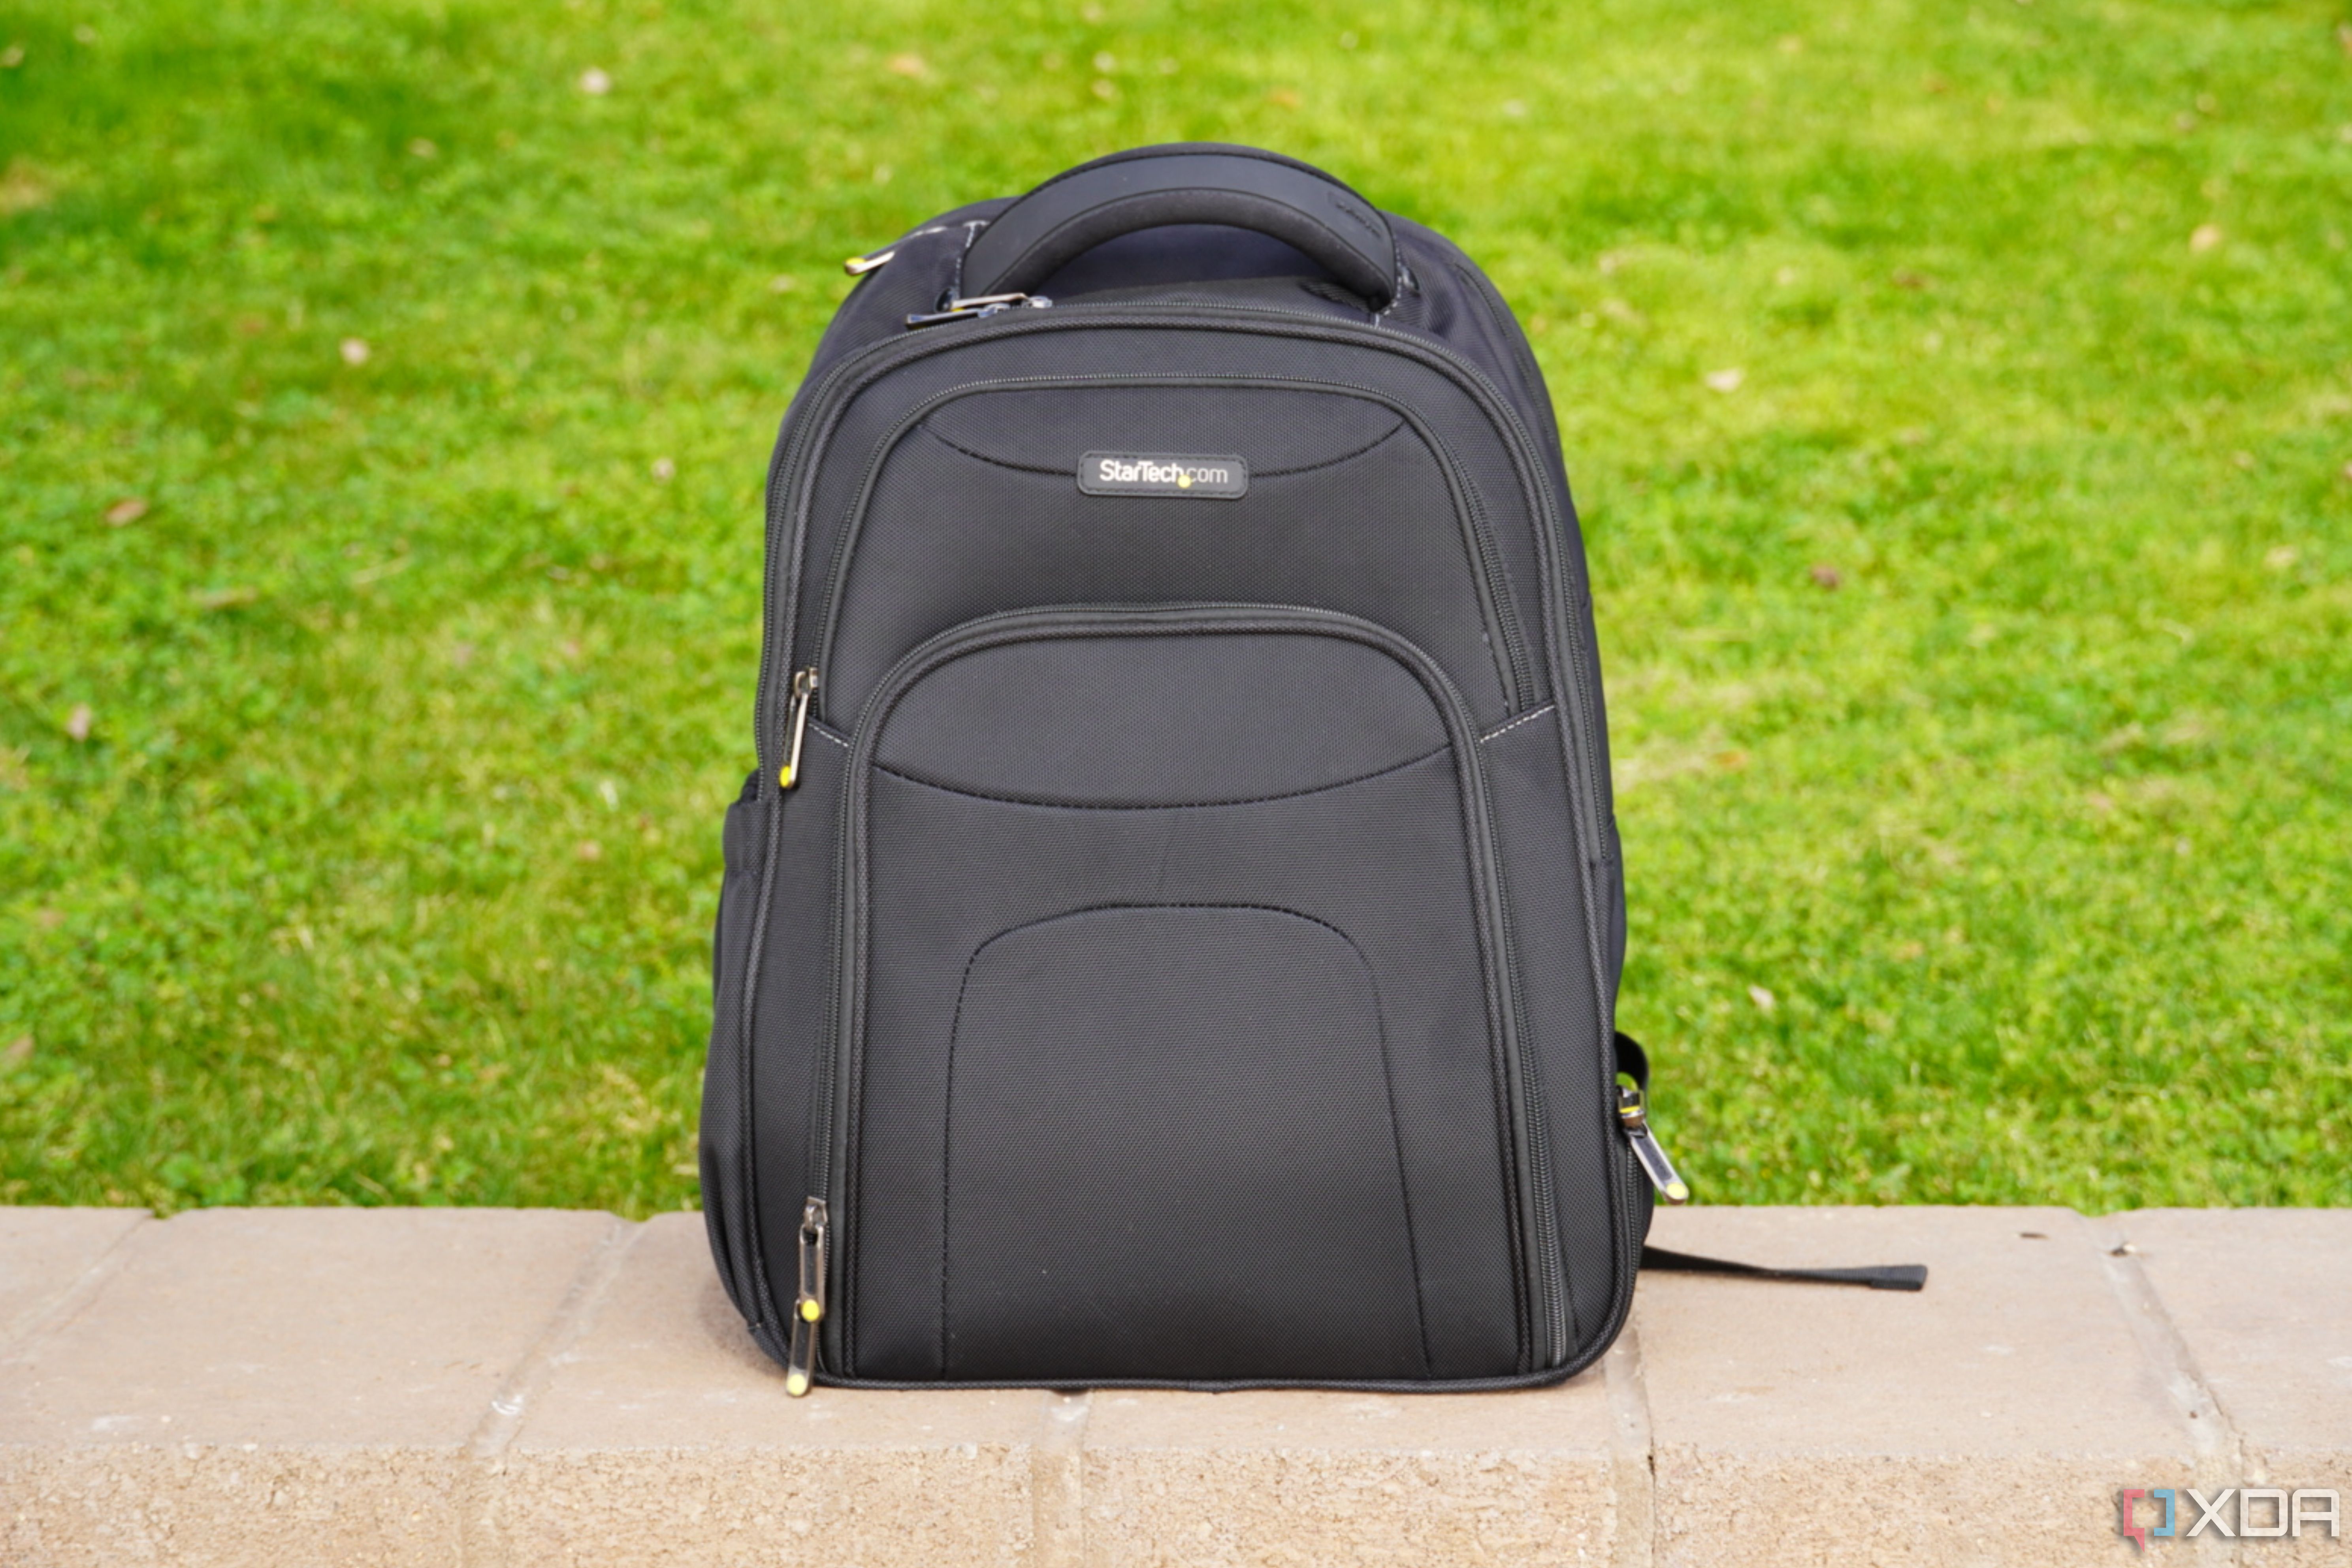 The Startech Laptop Backpack on a bench.